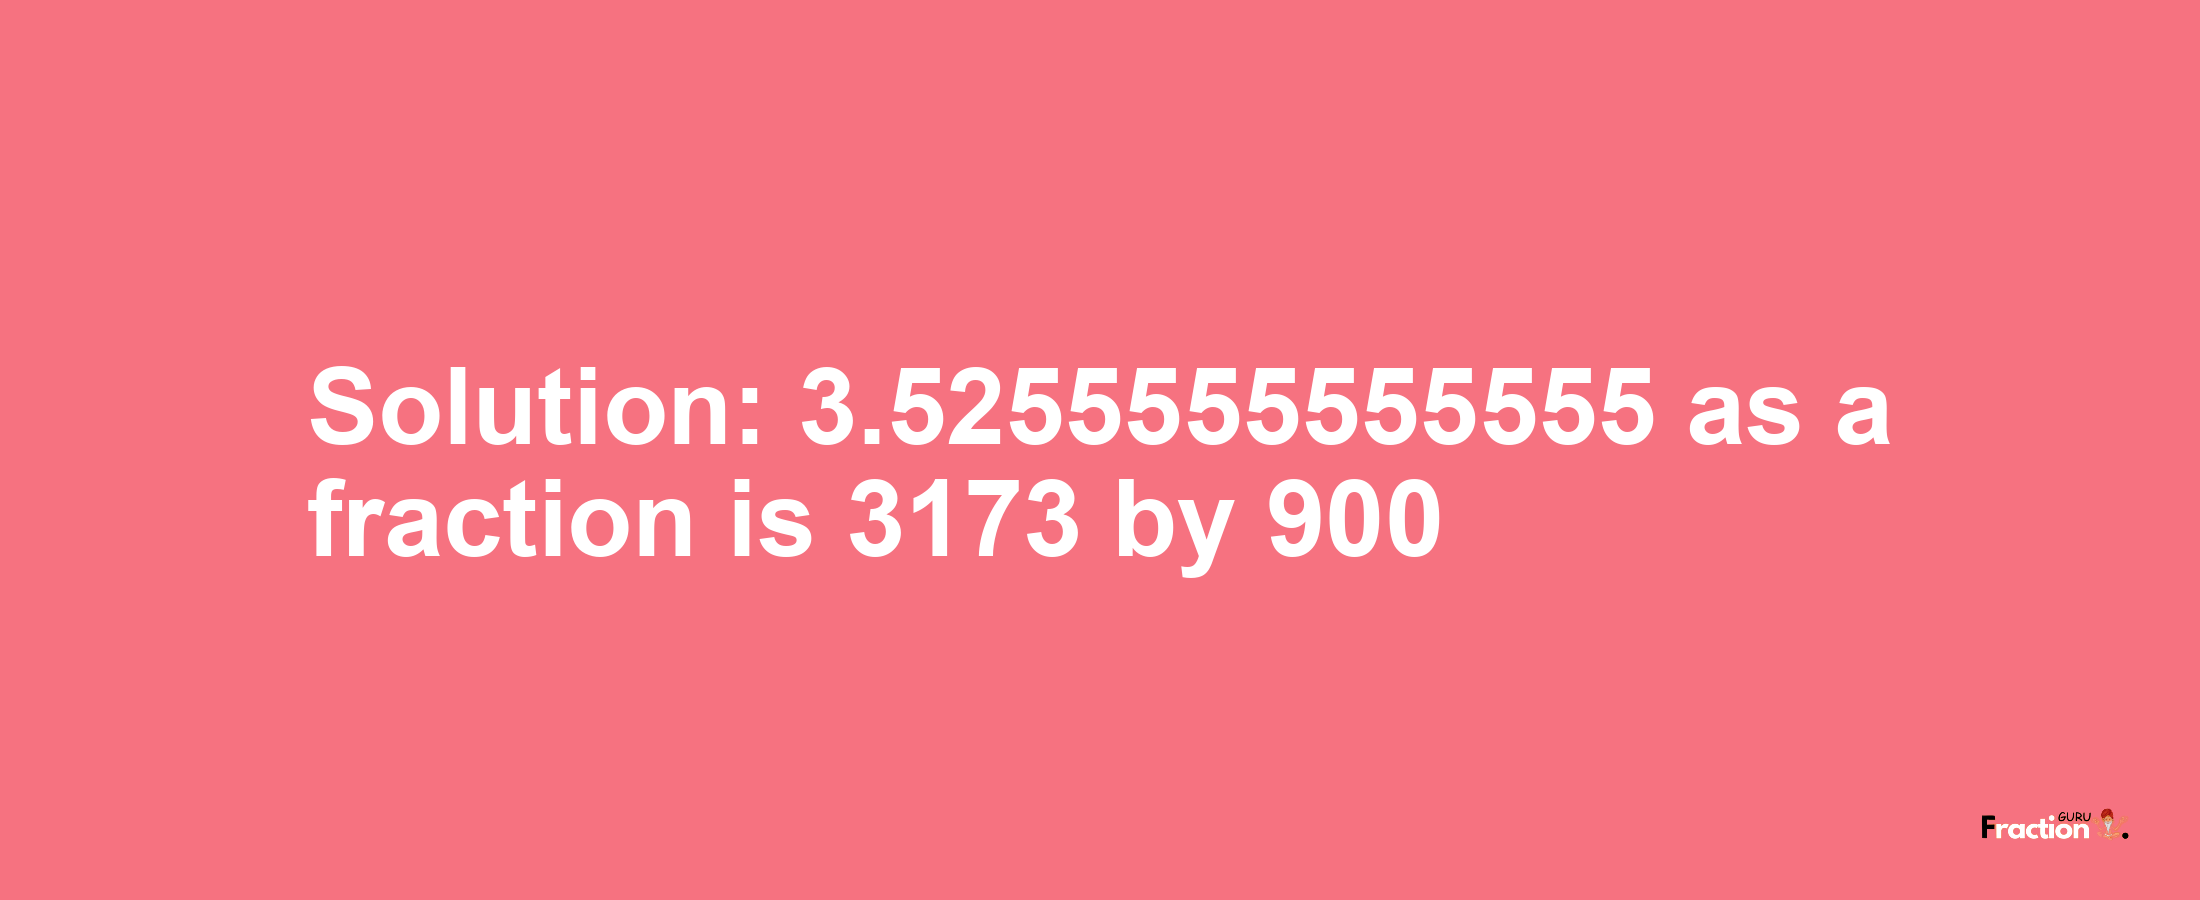 Solution:3.5255555555555 as a fraction is 3173/900